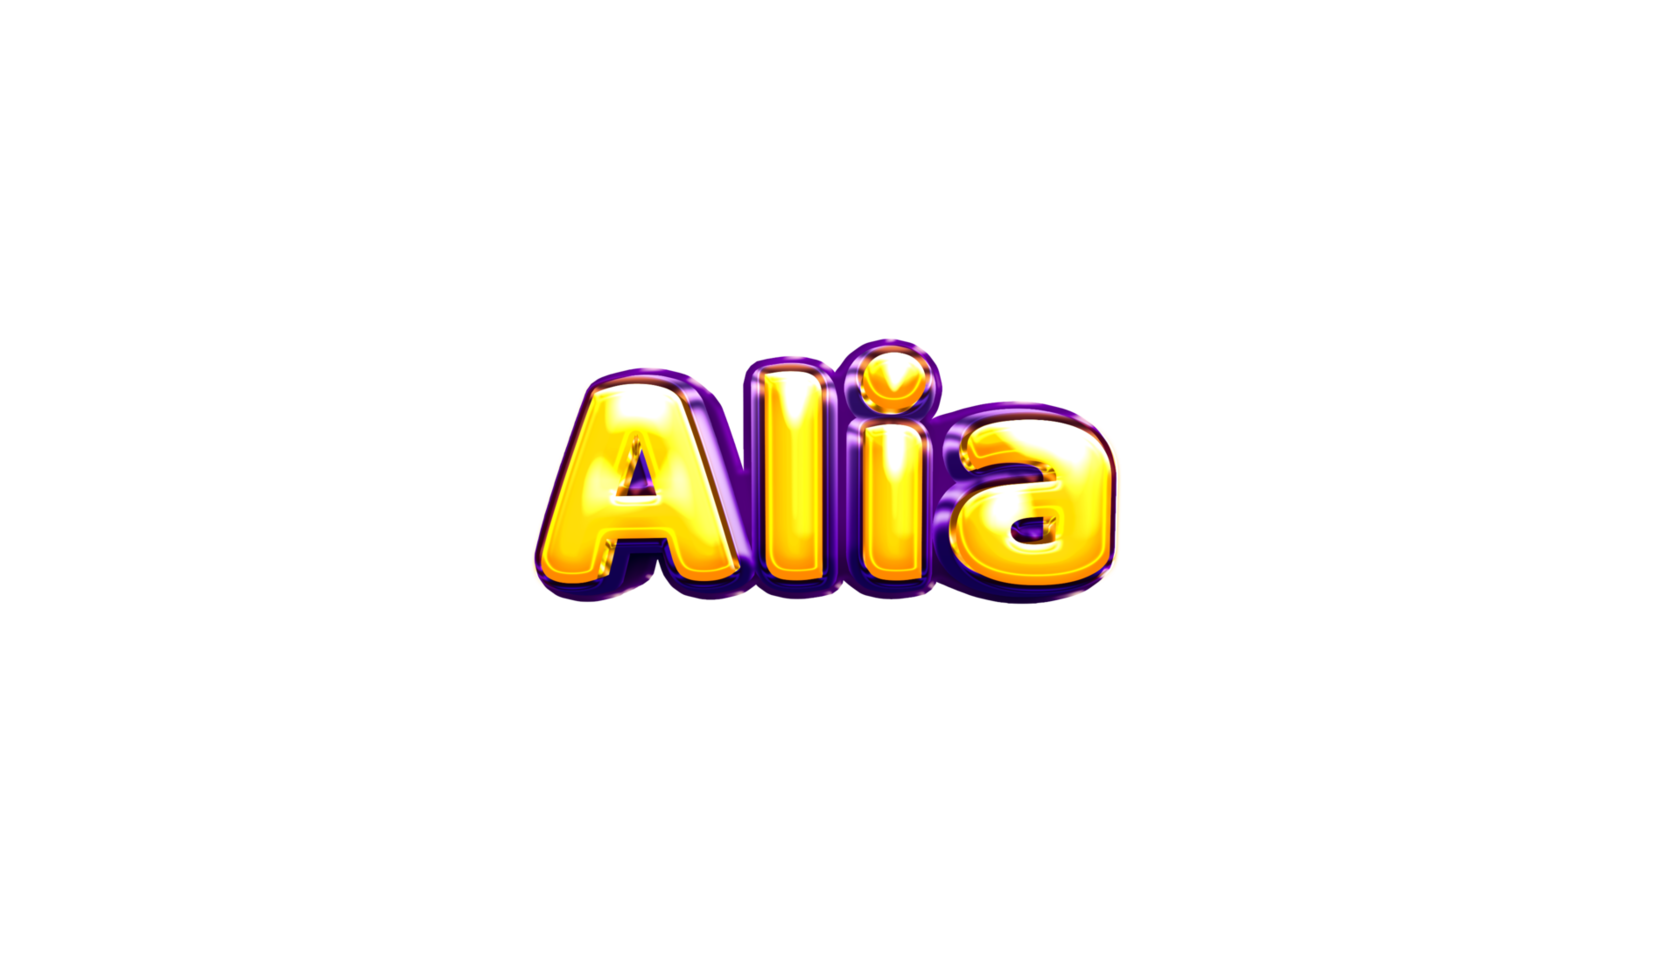 girls name sticker colorful party balloon birthday helium air shiny yellow purple cutout Alia png